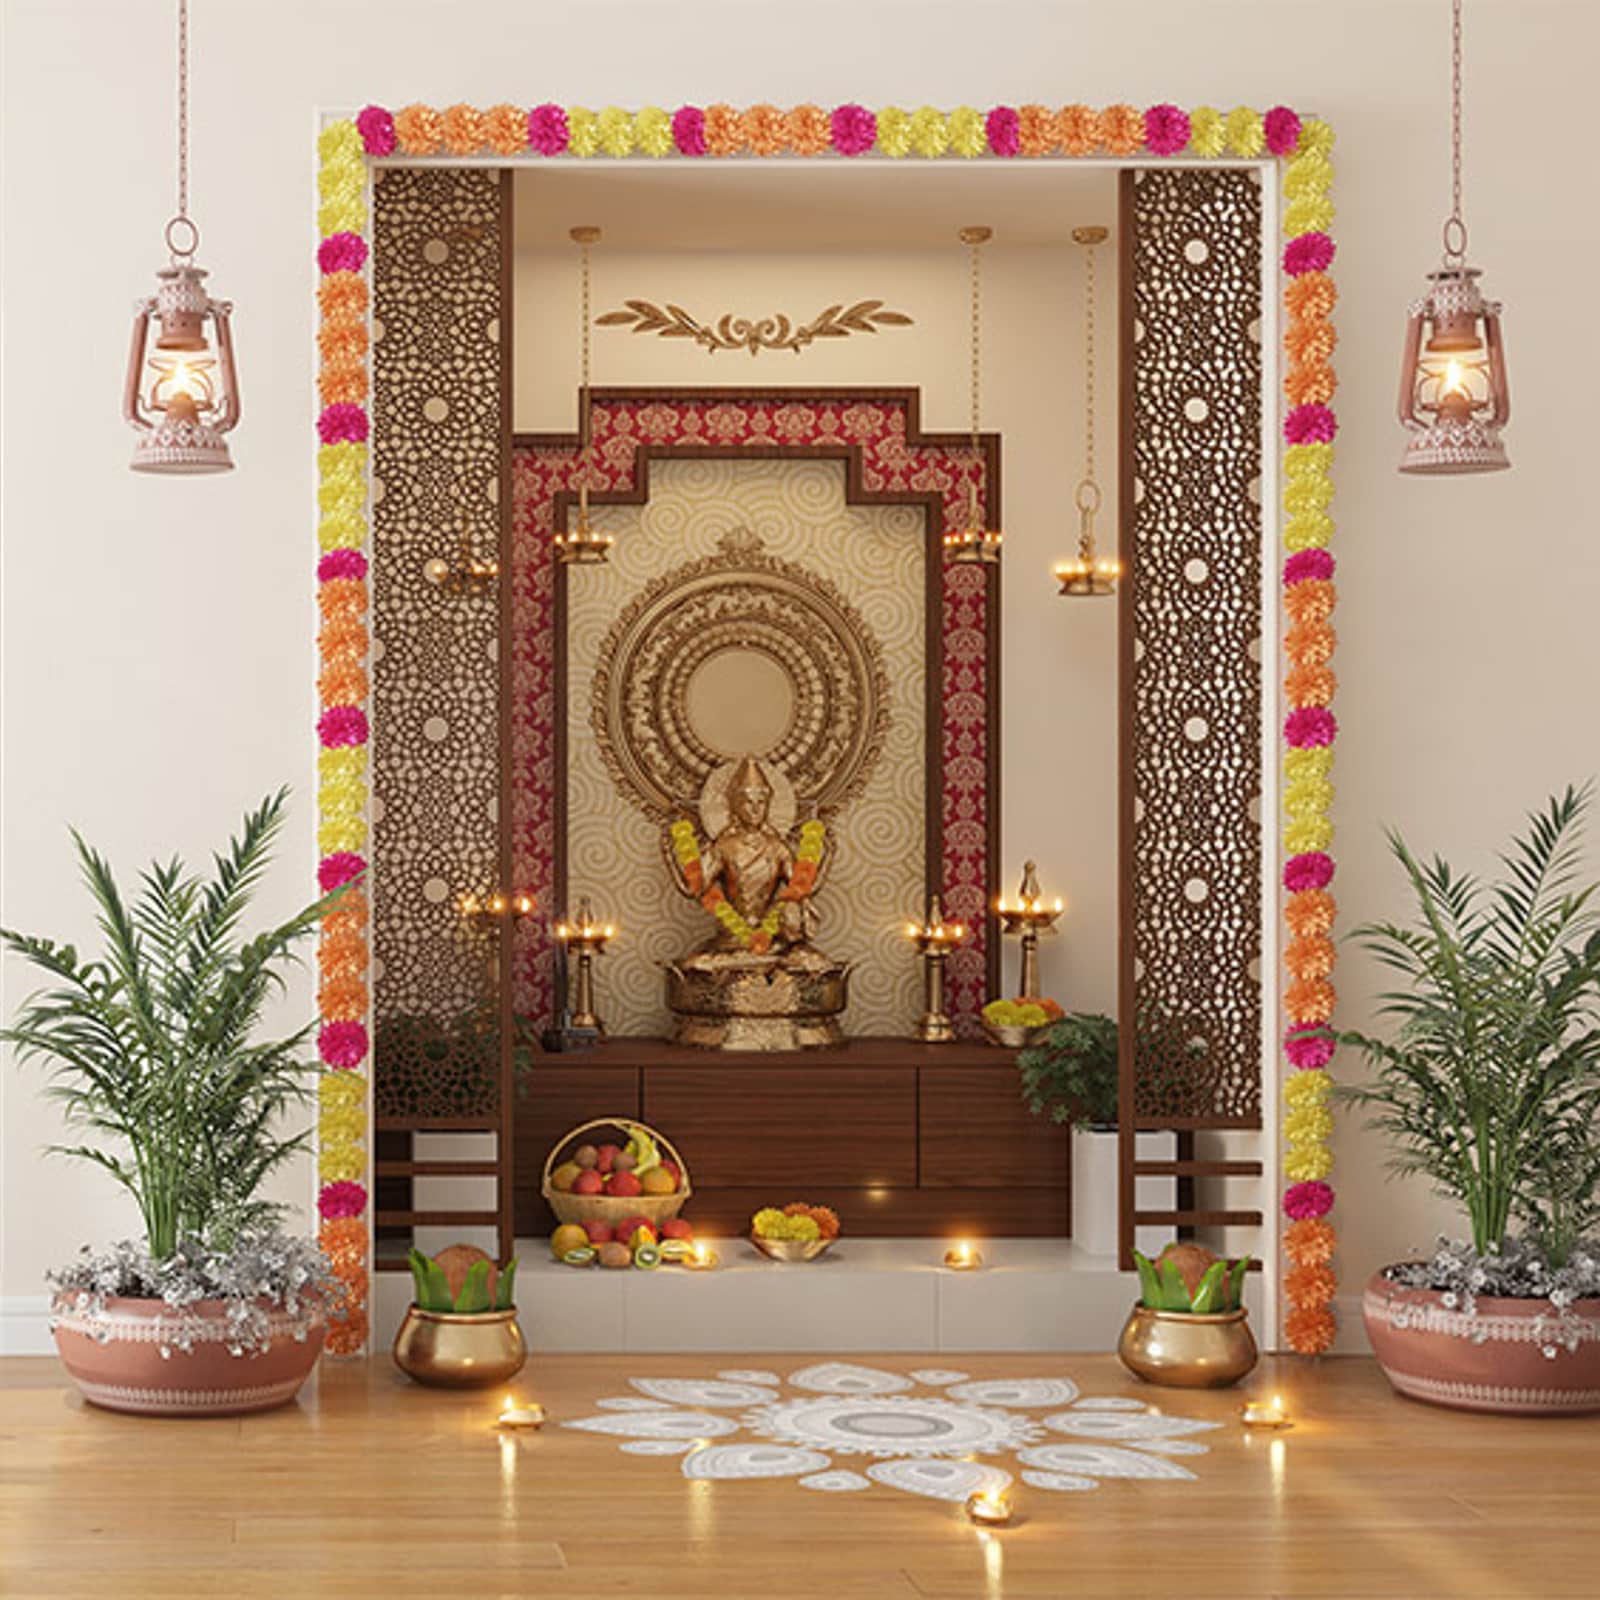 Navratri Decorations: DIY Home Decor Tips That You Have To Try - News18